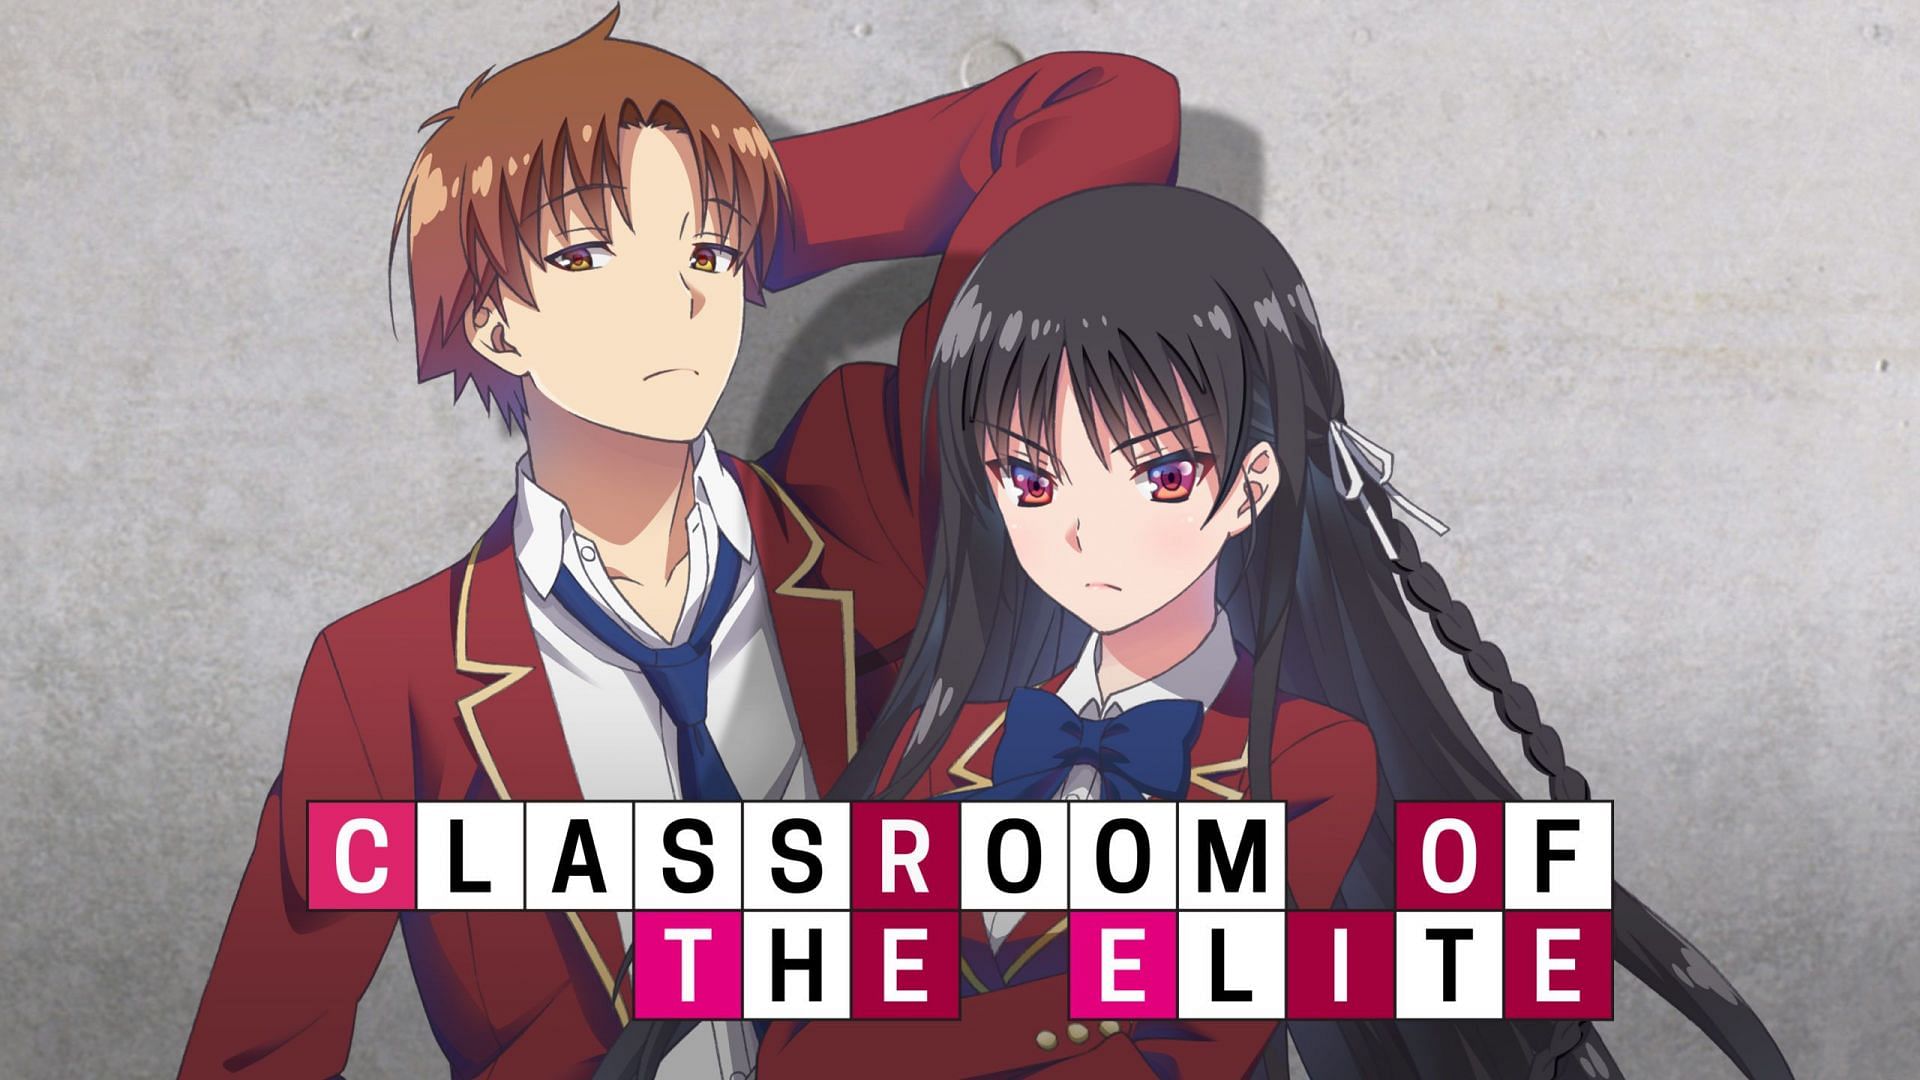 Classroom of the Elite announces release date for Season 2